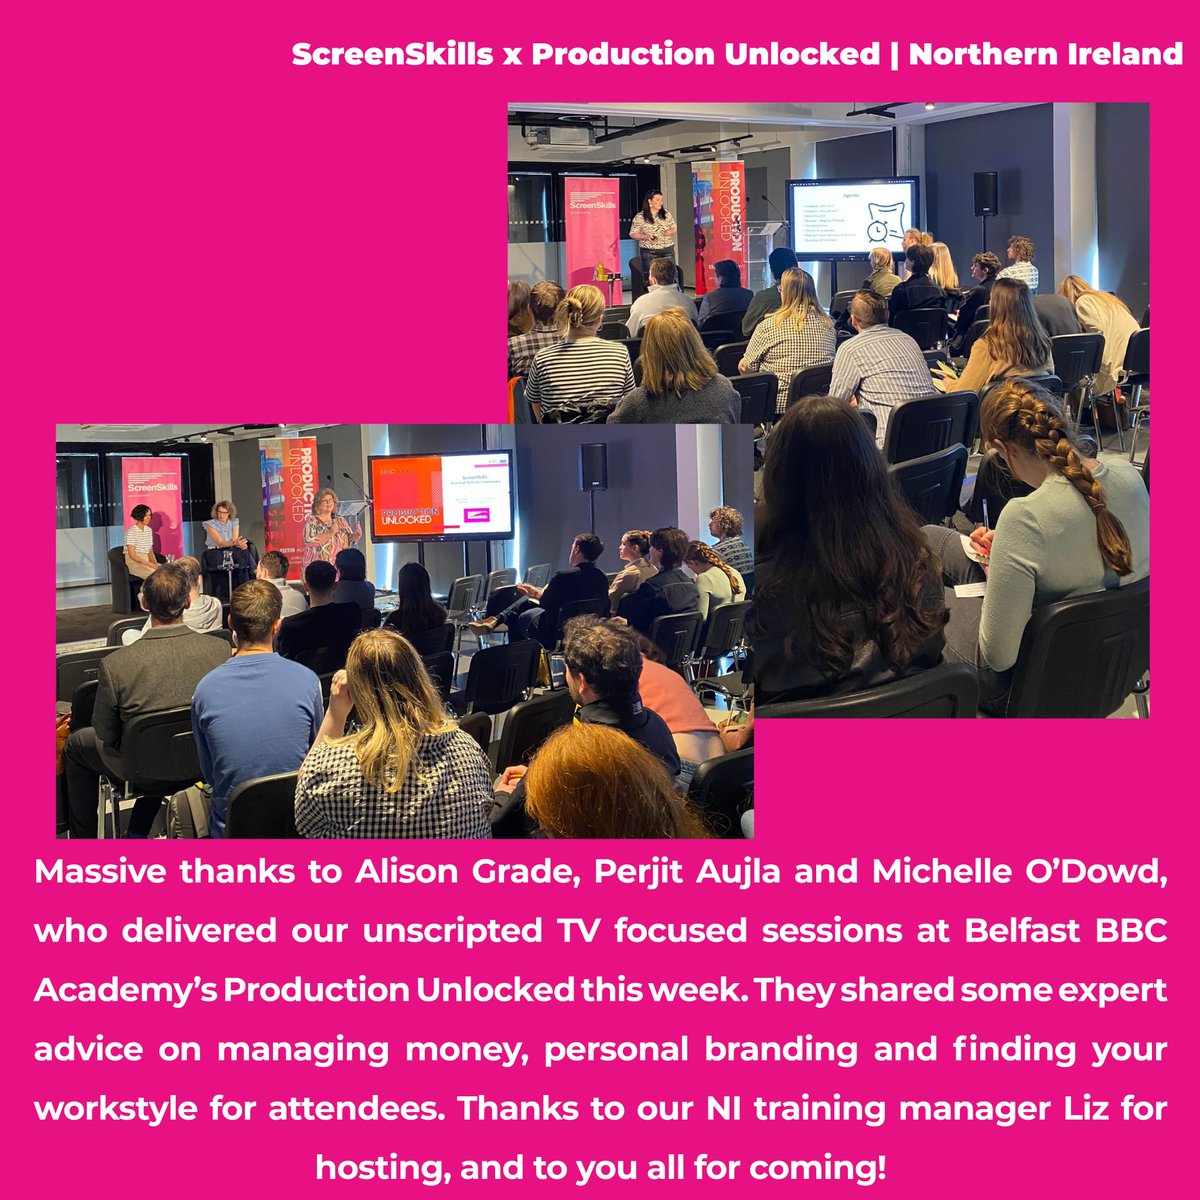 Also in Belfast, we joined @BBCAcademy #ProductionUnlocked for 3 #unscriptedTV sessions focused on managing money, personal #branding & finding your workstyle. Thanks to you all for coming and to Alison Grade, Perjit Aujla & Michelle O’Dowd for sharing some great expert advice🗣️